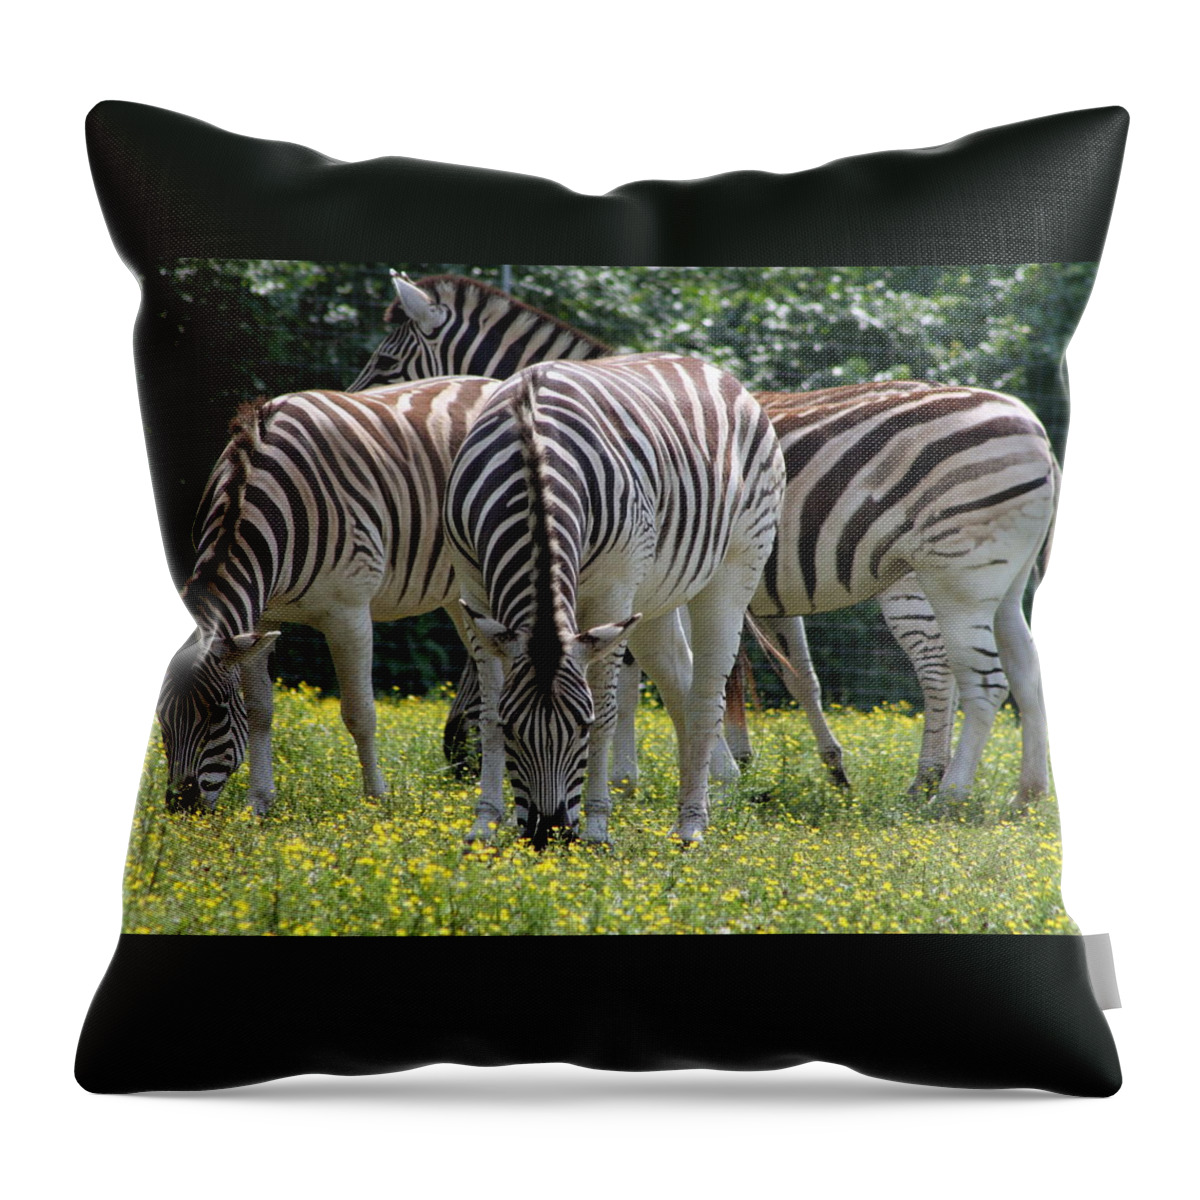 Zebra Throw Pillow featuring the photograph Four Zebras Grazing by Valerie Collins